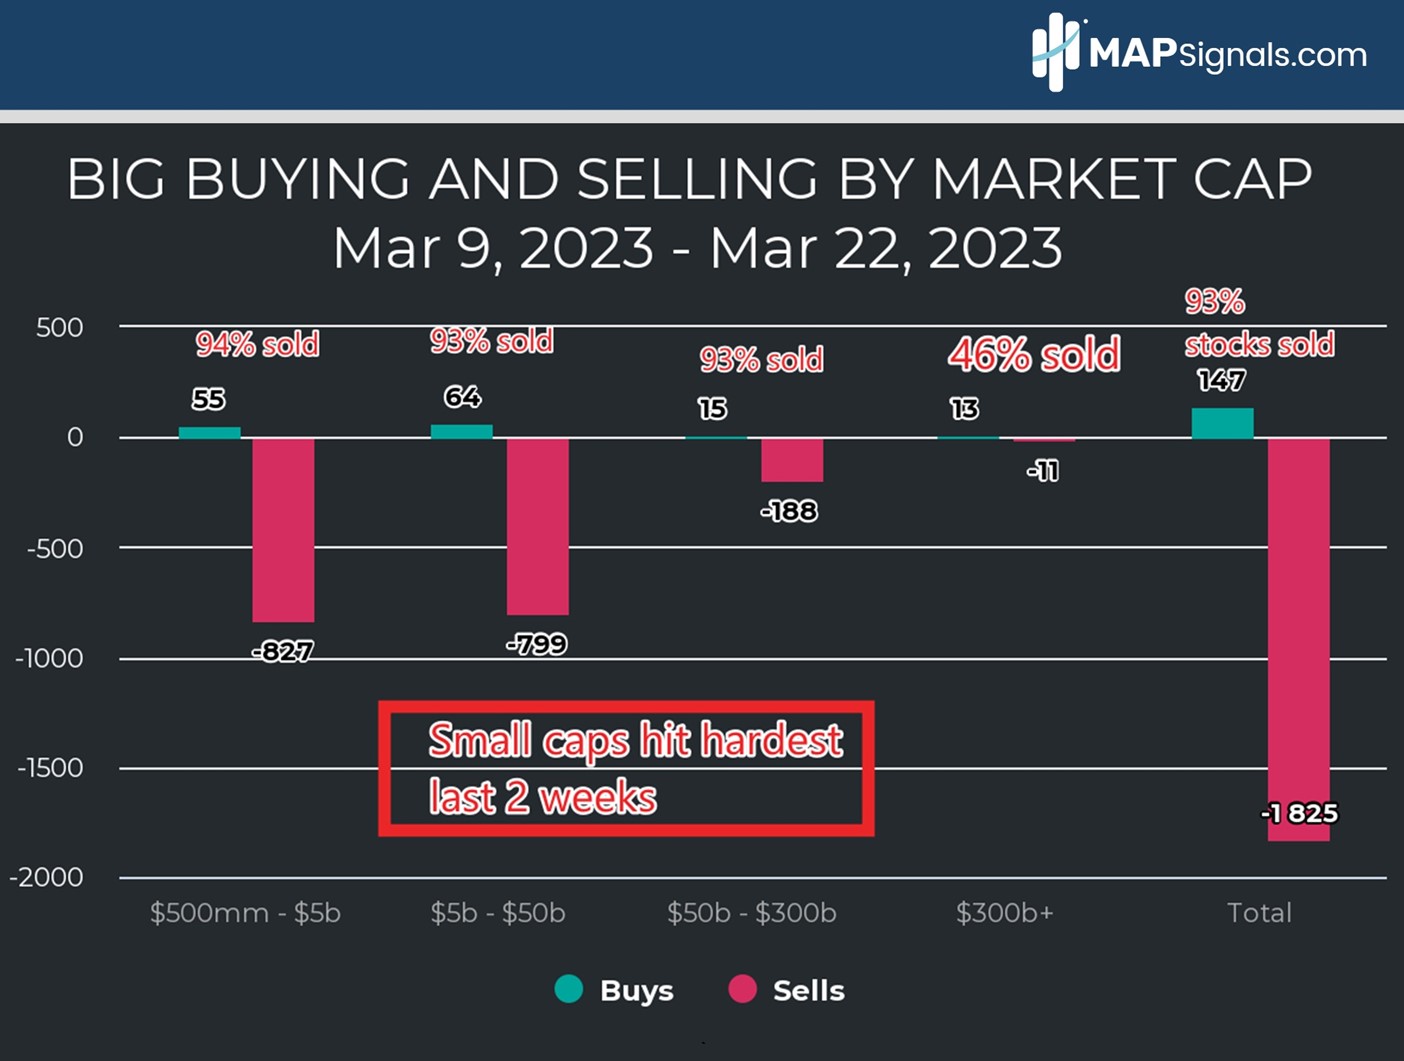 Small Caps hit hard | Big Money Buying & Selling by Market Cap | MAPsignals